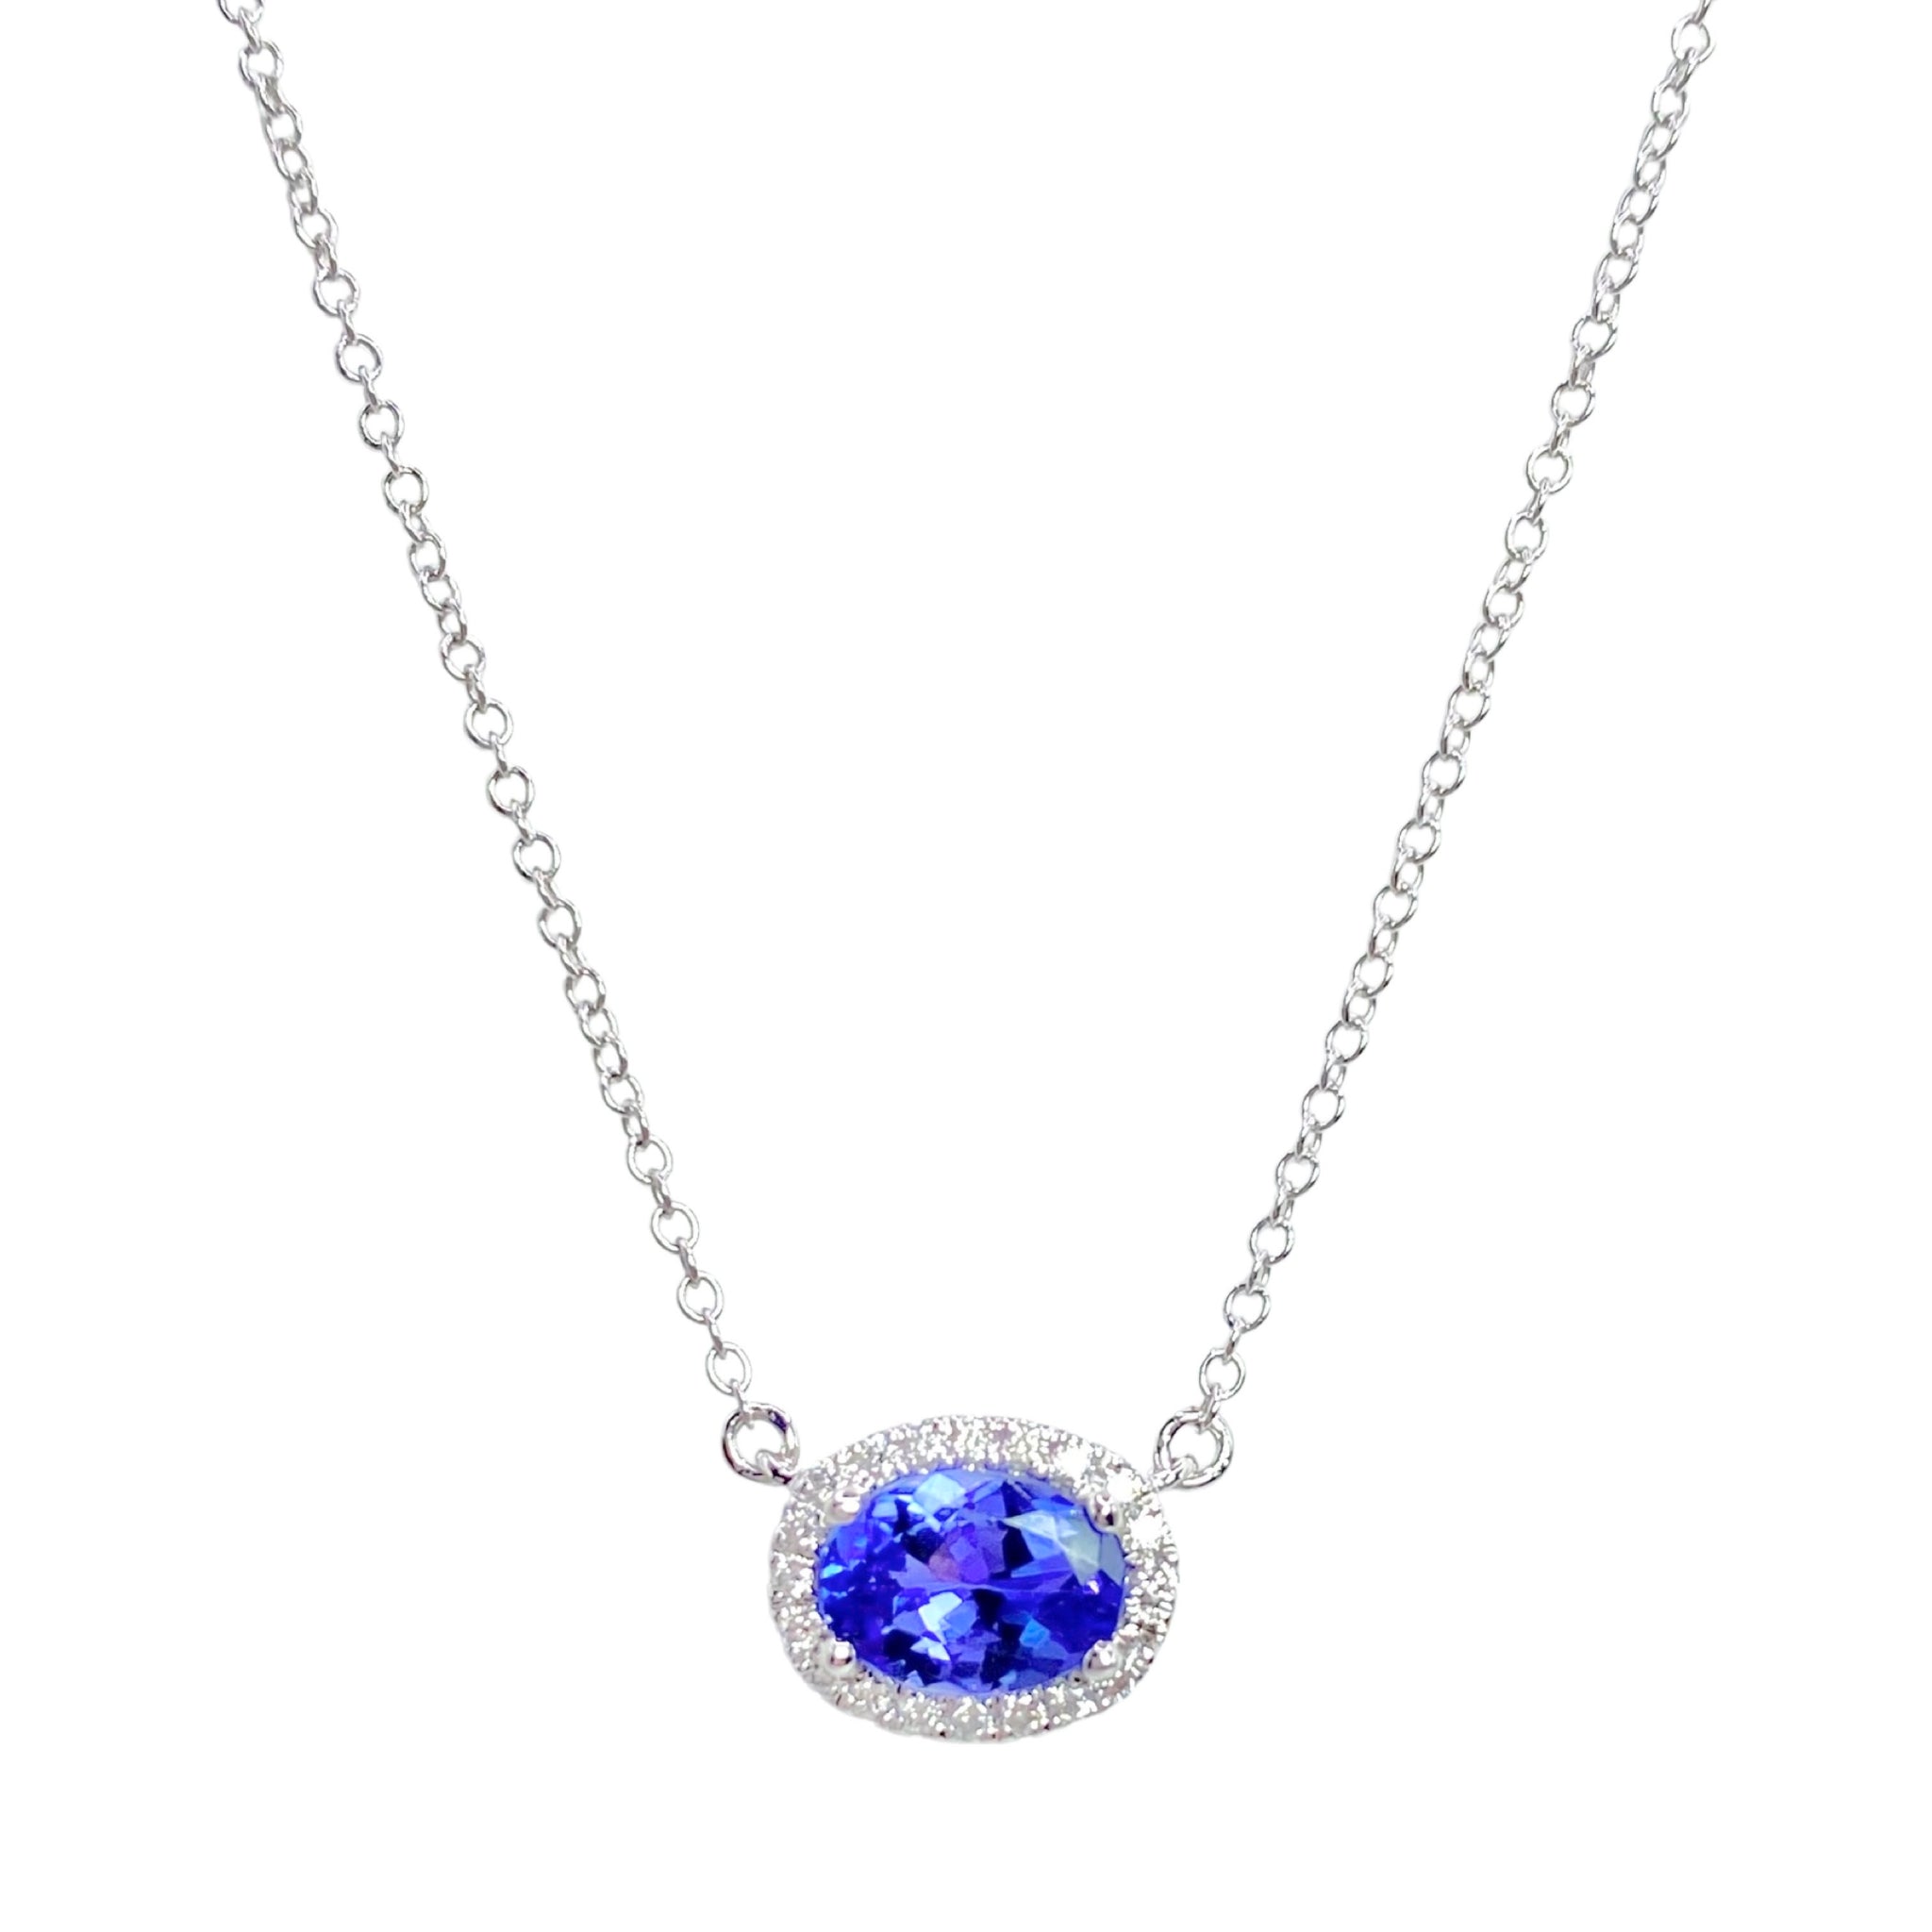 Meira T Tanzanite & Diamond Necklaceavailable at Shaylula Jewlery & Gifts in Tarrytown, NY and online. Stunning - that's the only word for this Meira T tanzanite and diamond necklace! Crafted in 14k white gold and surrounded with a halo of diamonds, this necklace radiates an air of regality.  • 14k, .12 ct dia, .85 ct tanz  • Lobster clasp